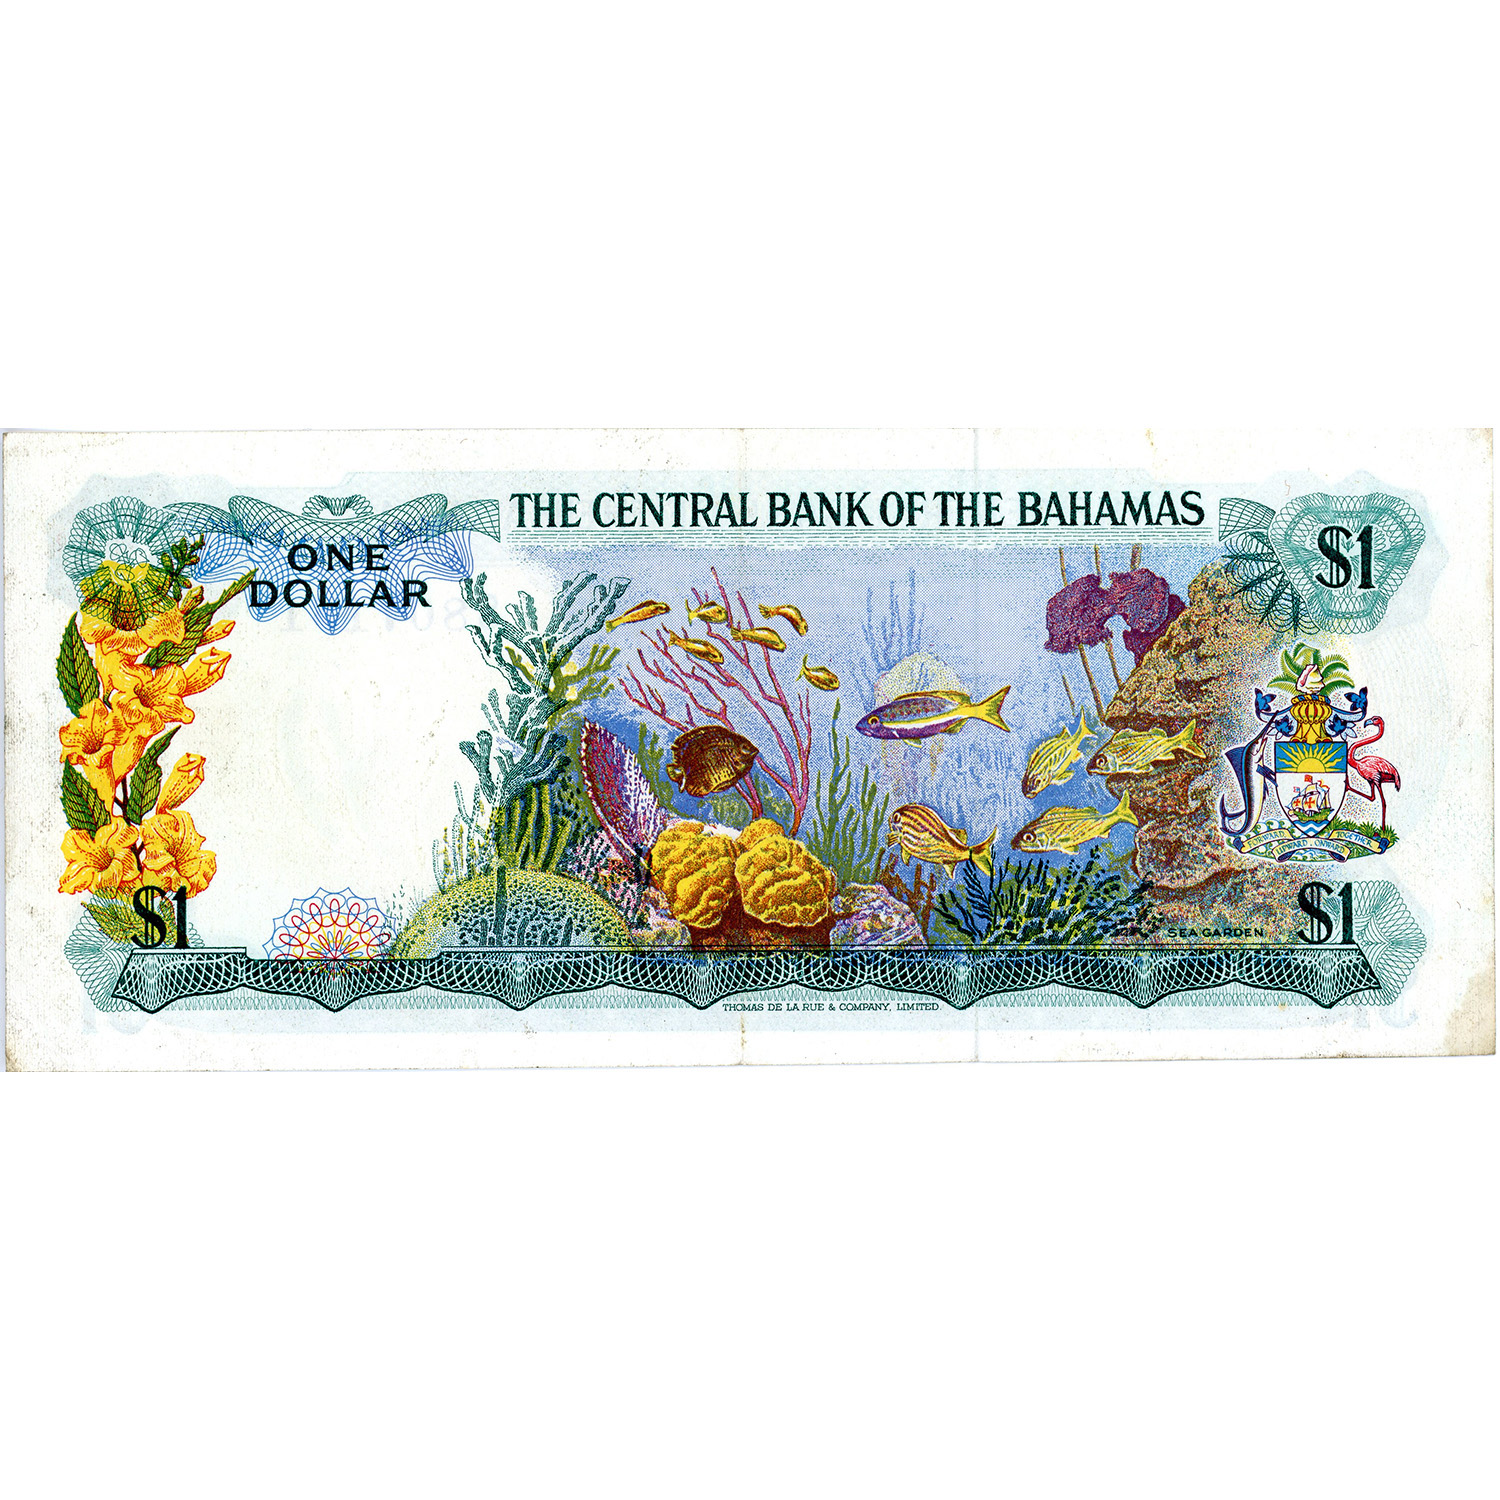 Currency From North America & Caribbean